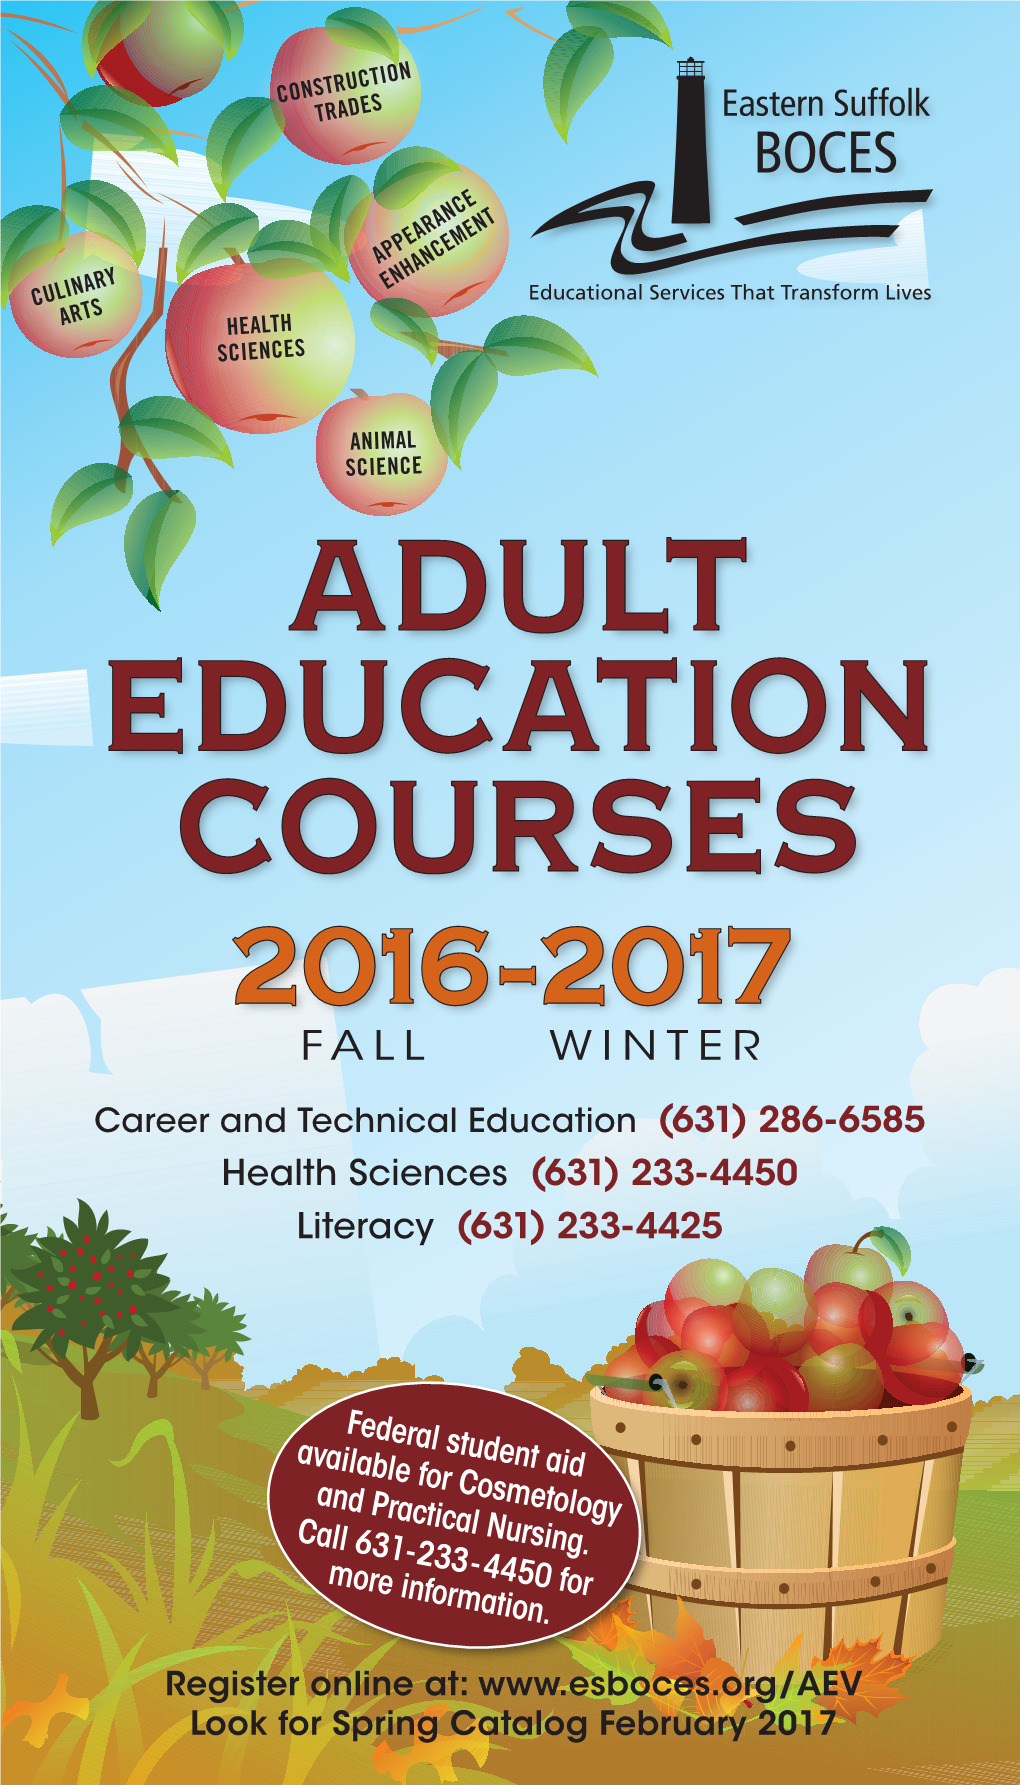 Adult Education Courses